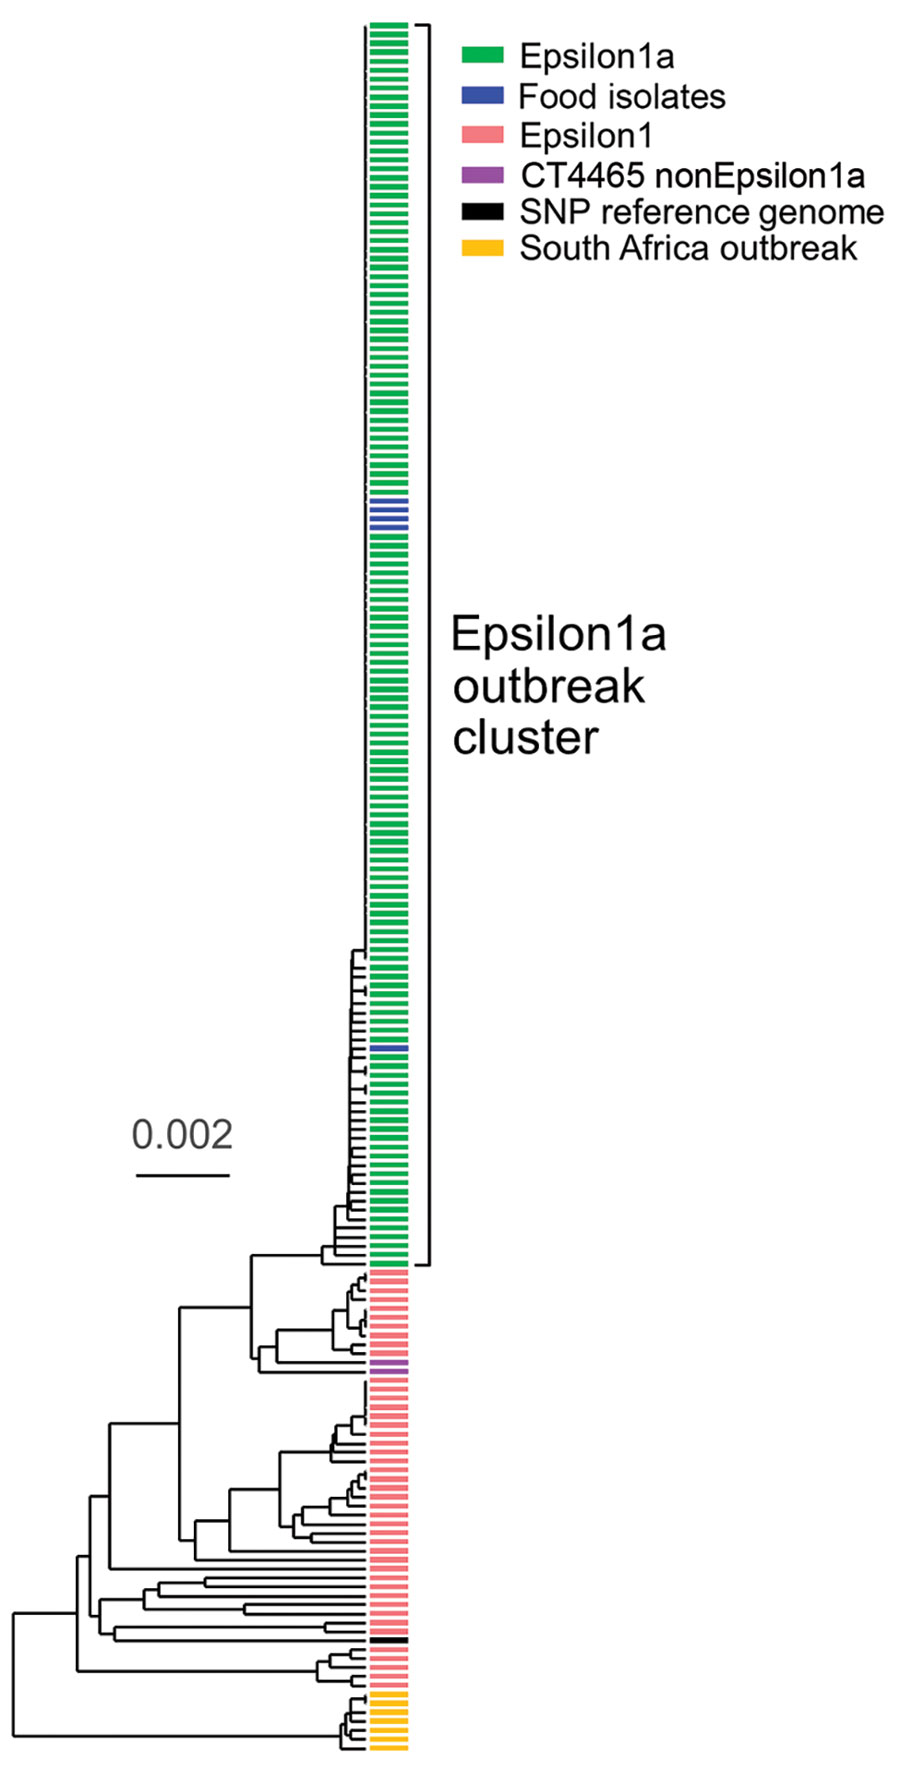 Phylogenic tree constructed by using unweighted pair group method with arithmetic mean and core genome multilocus sequence typing data of Listeria monocytogenes isolates from a large listeriosis outbreak, Germany. Green indicates clinical isolates of Epsilon1a subcluster; blue indicates food isolates of Epsilon1a subcluster; pink indicates isolates from the Epsilon1 cluster; violet indicates 2 complex type 4465 isolates not belonging to Epsilon1a from earlier listeriosis cases in July 2017 and J